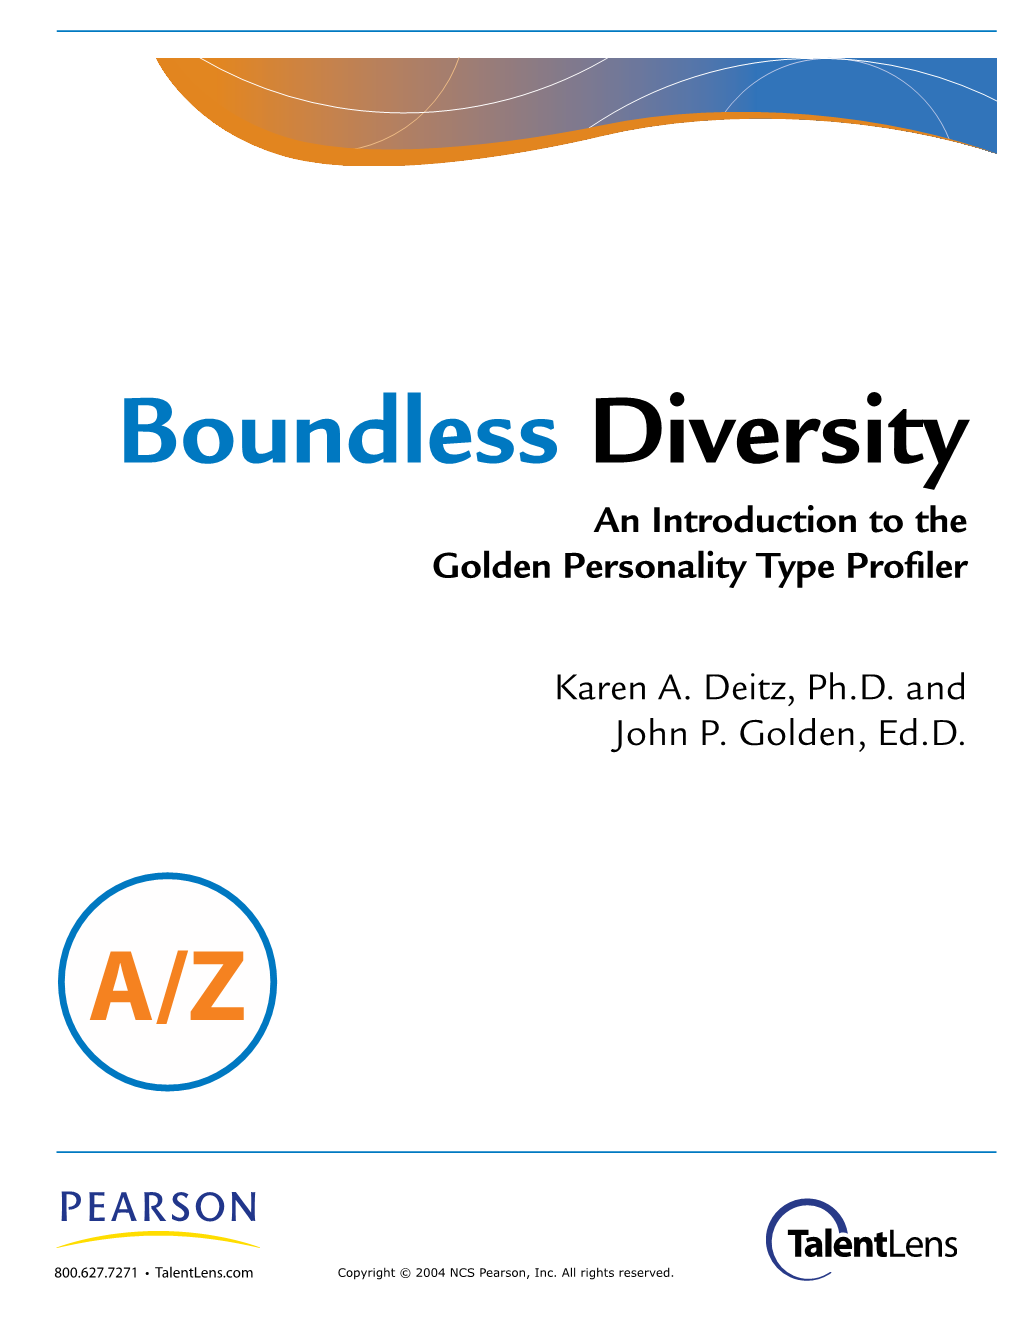 Boundless Diversity an Introduction to the Golden Personality Type Profiler